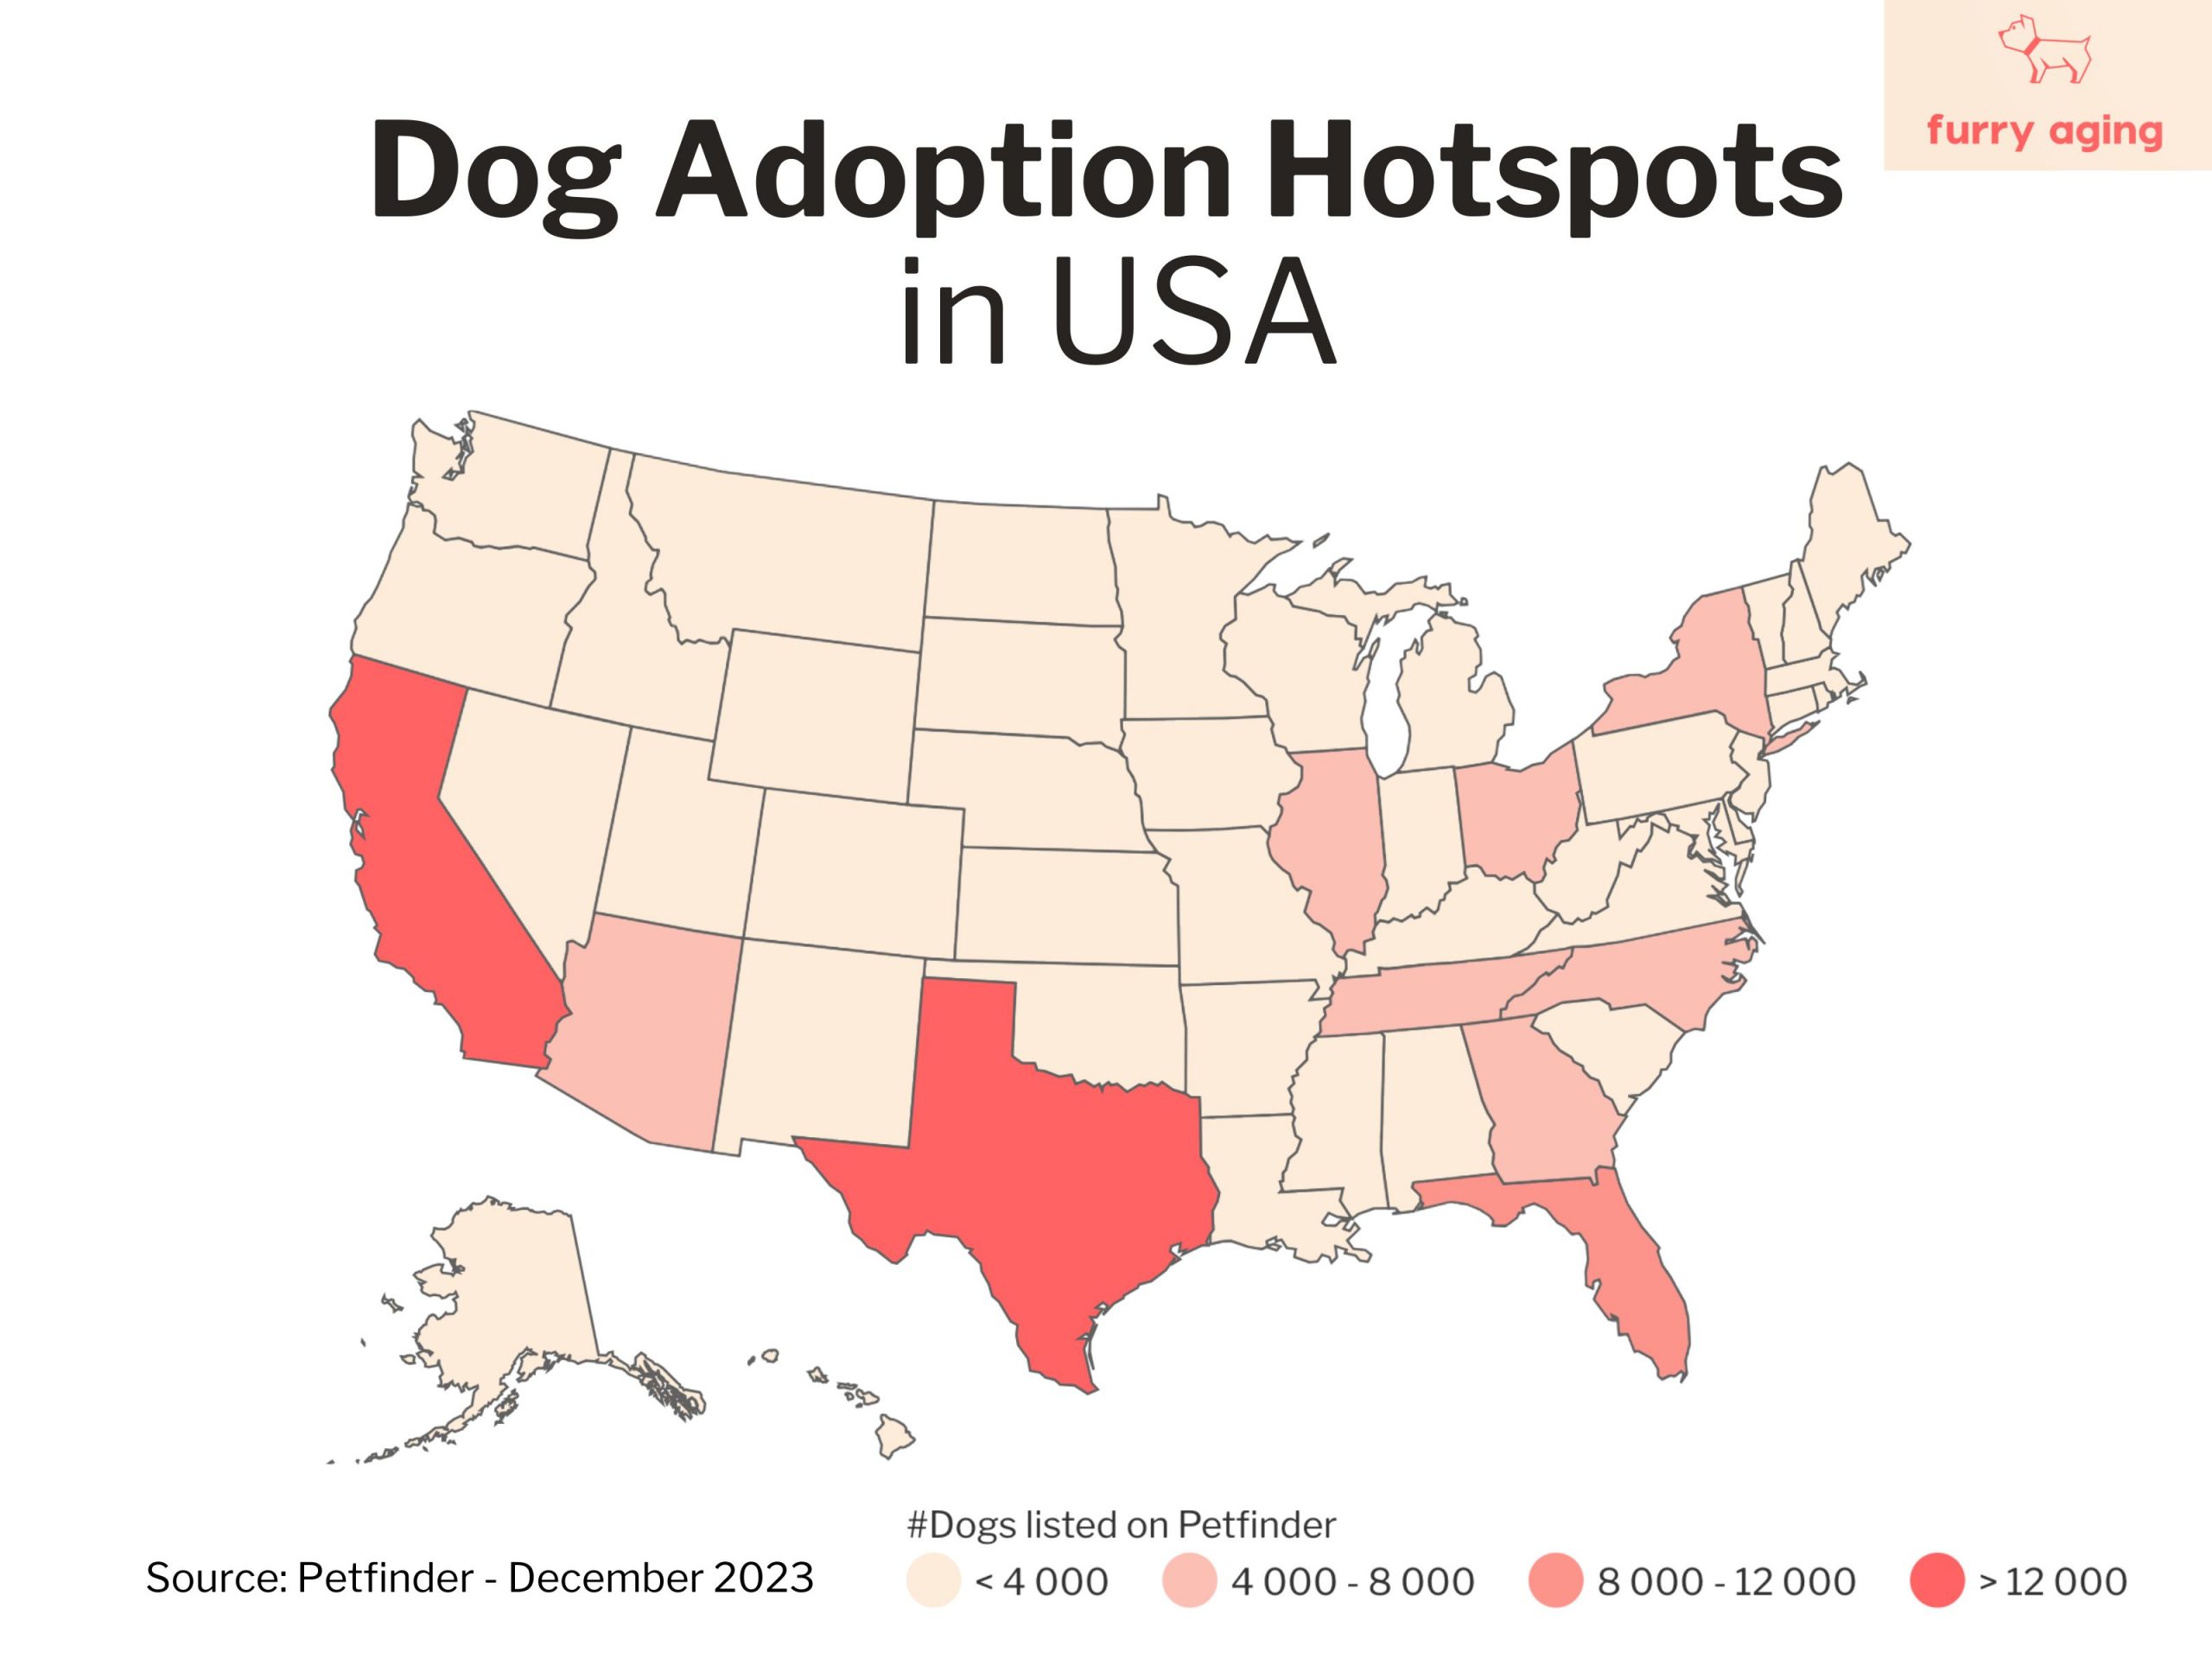 Availability of adoptable dogs per state